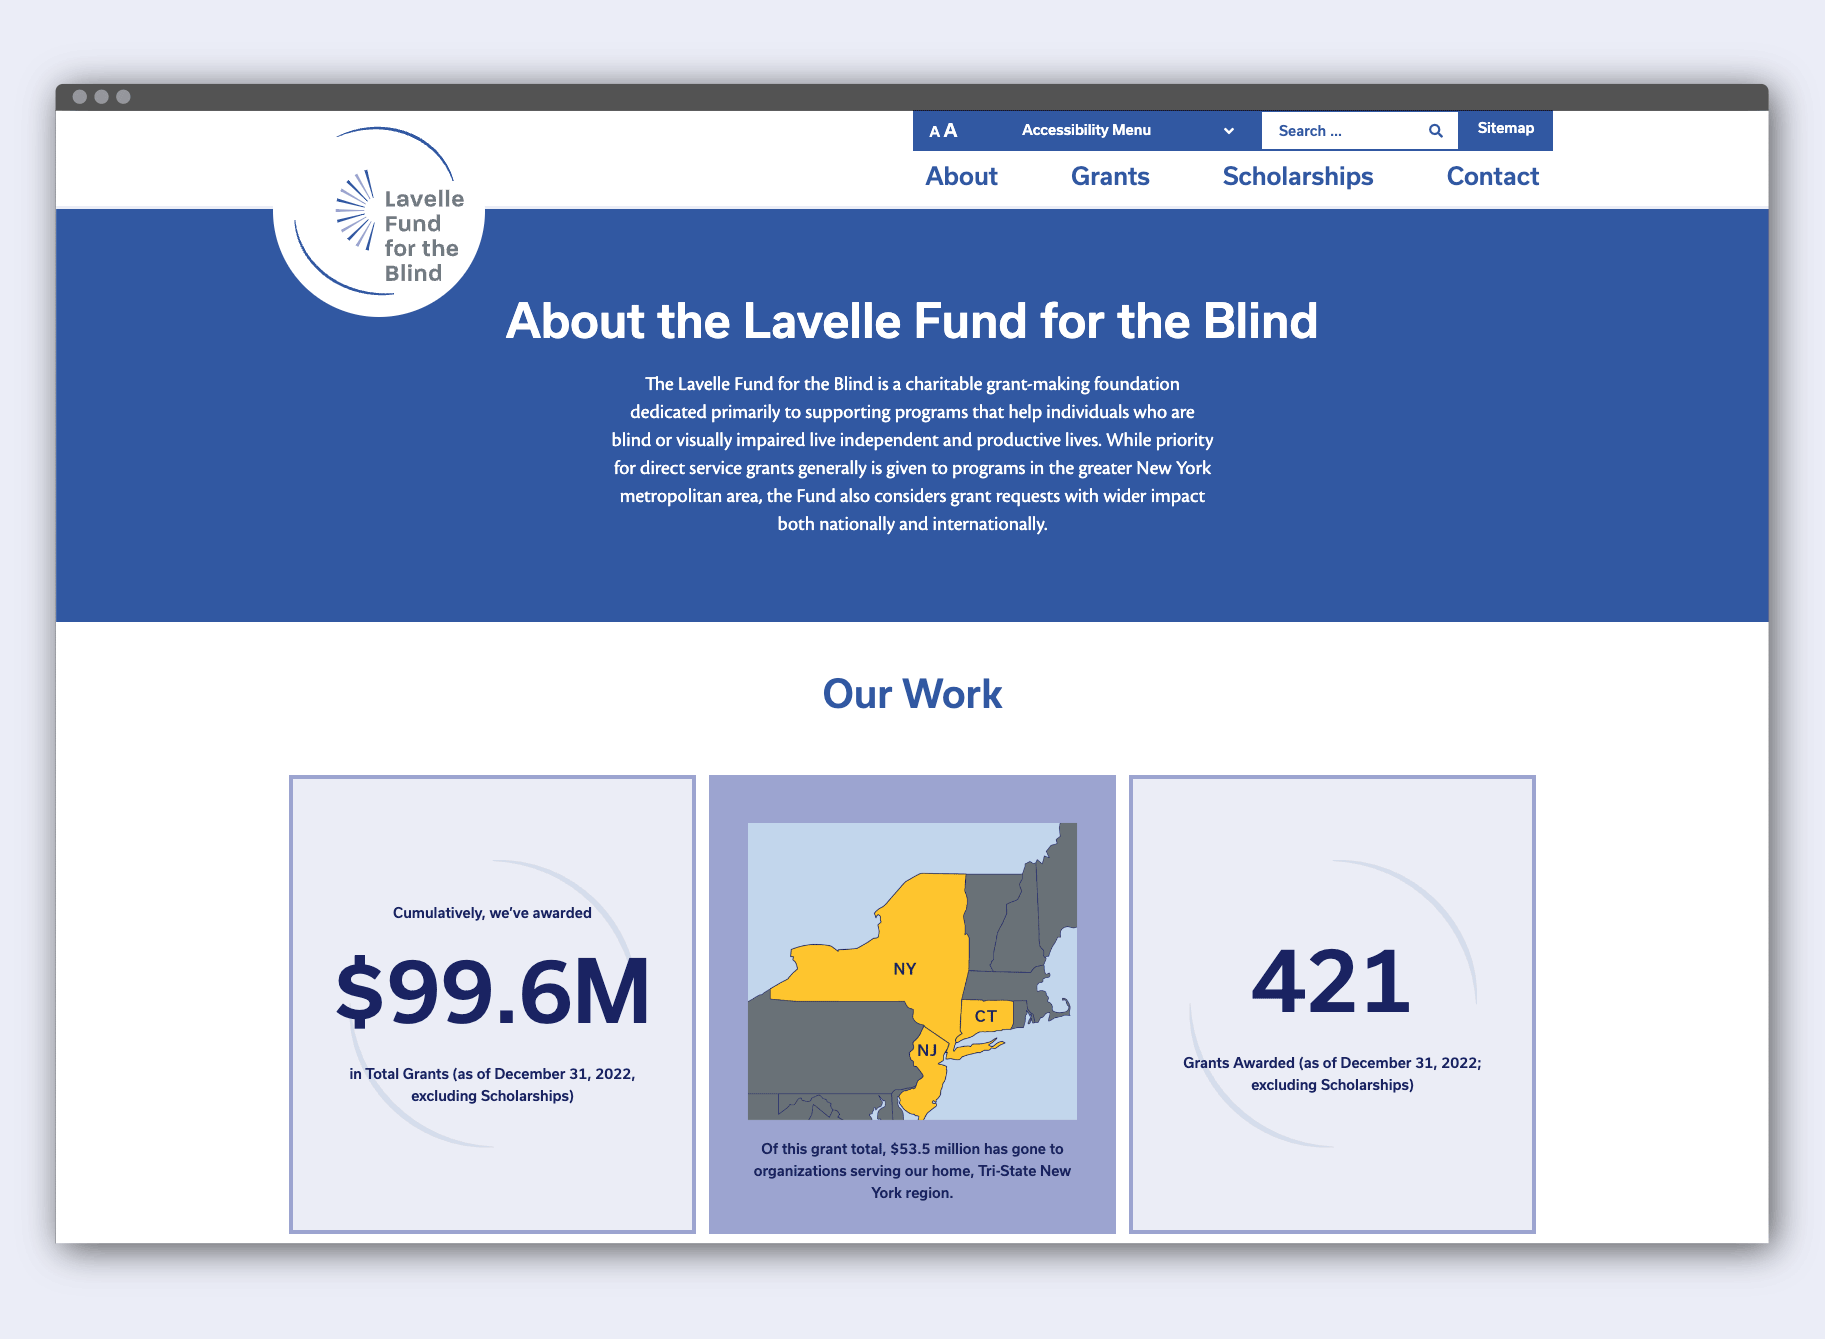 Lavelle Fund website accessibility and contrast controls.